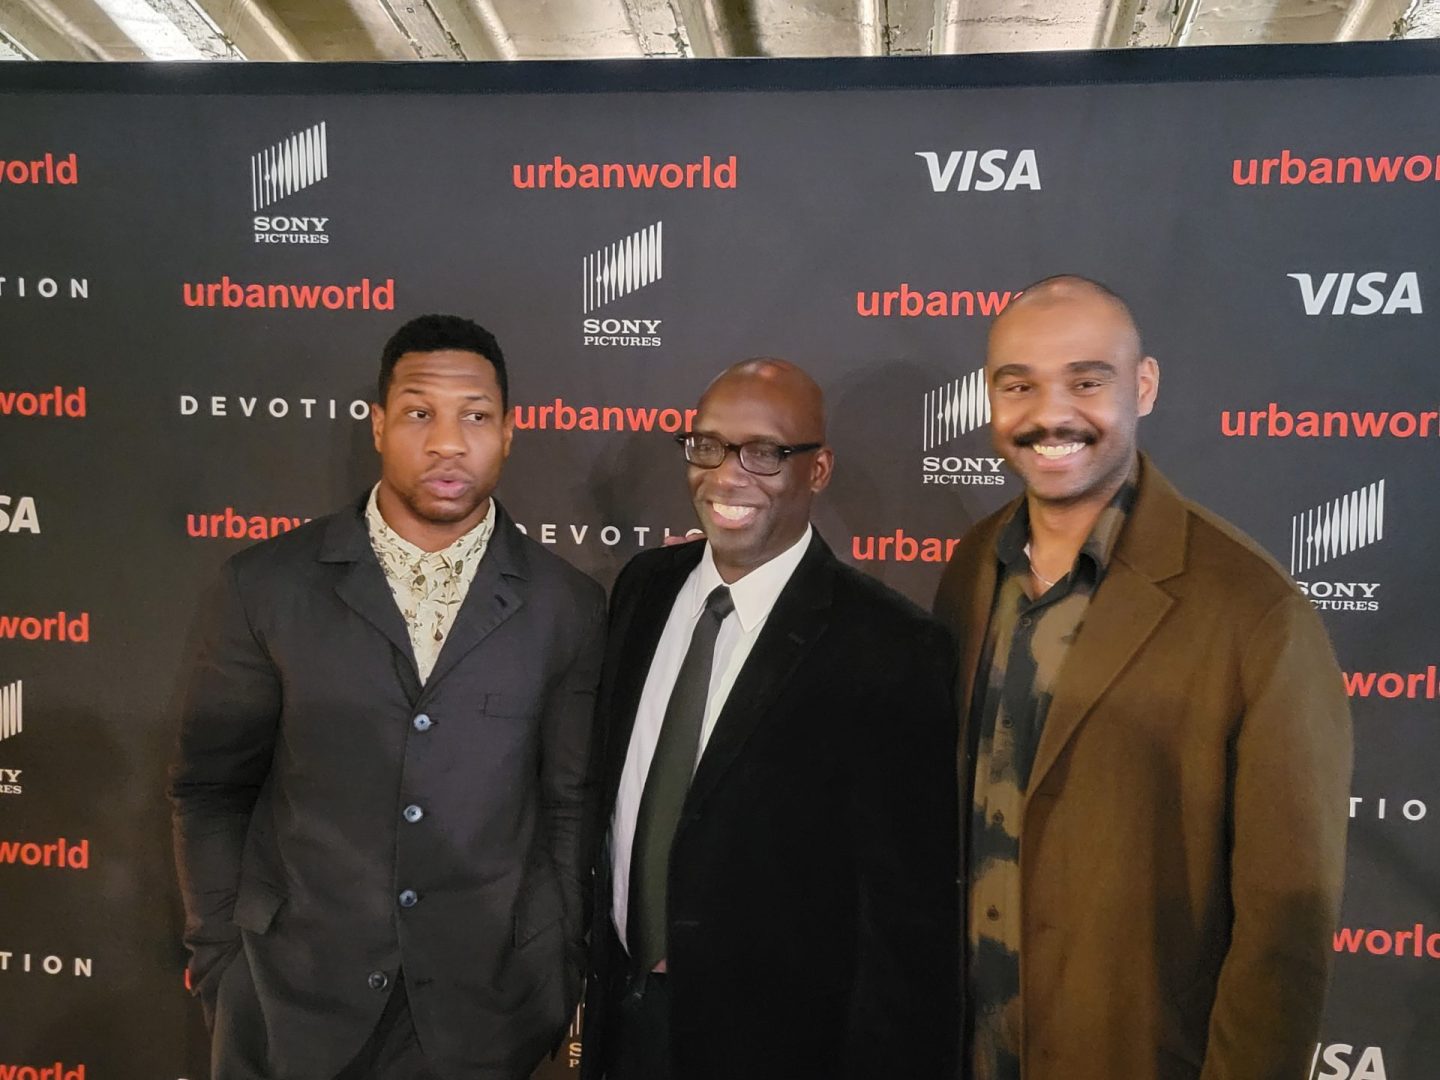 Actor Jonathan Majors, Urbanworld Film Festival founder Stacy Spikes, and Director JD Dillard. (Photo by Derrel Jazz Johnson for rolling out)